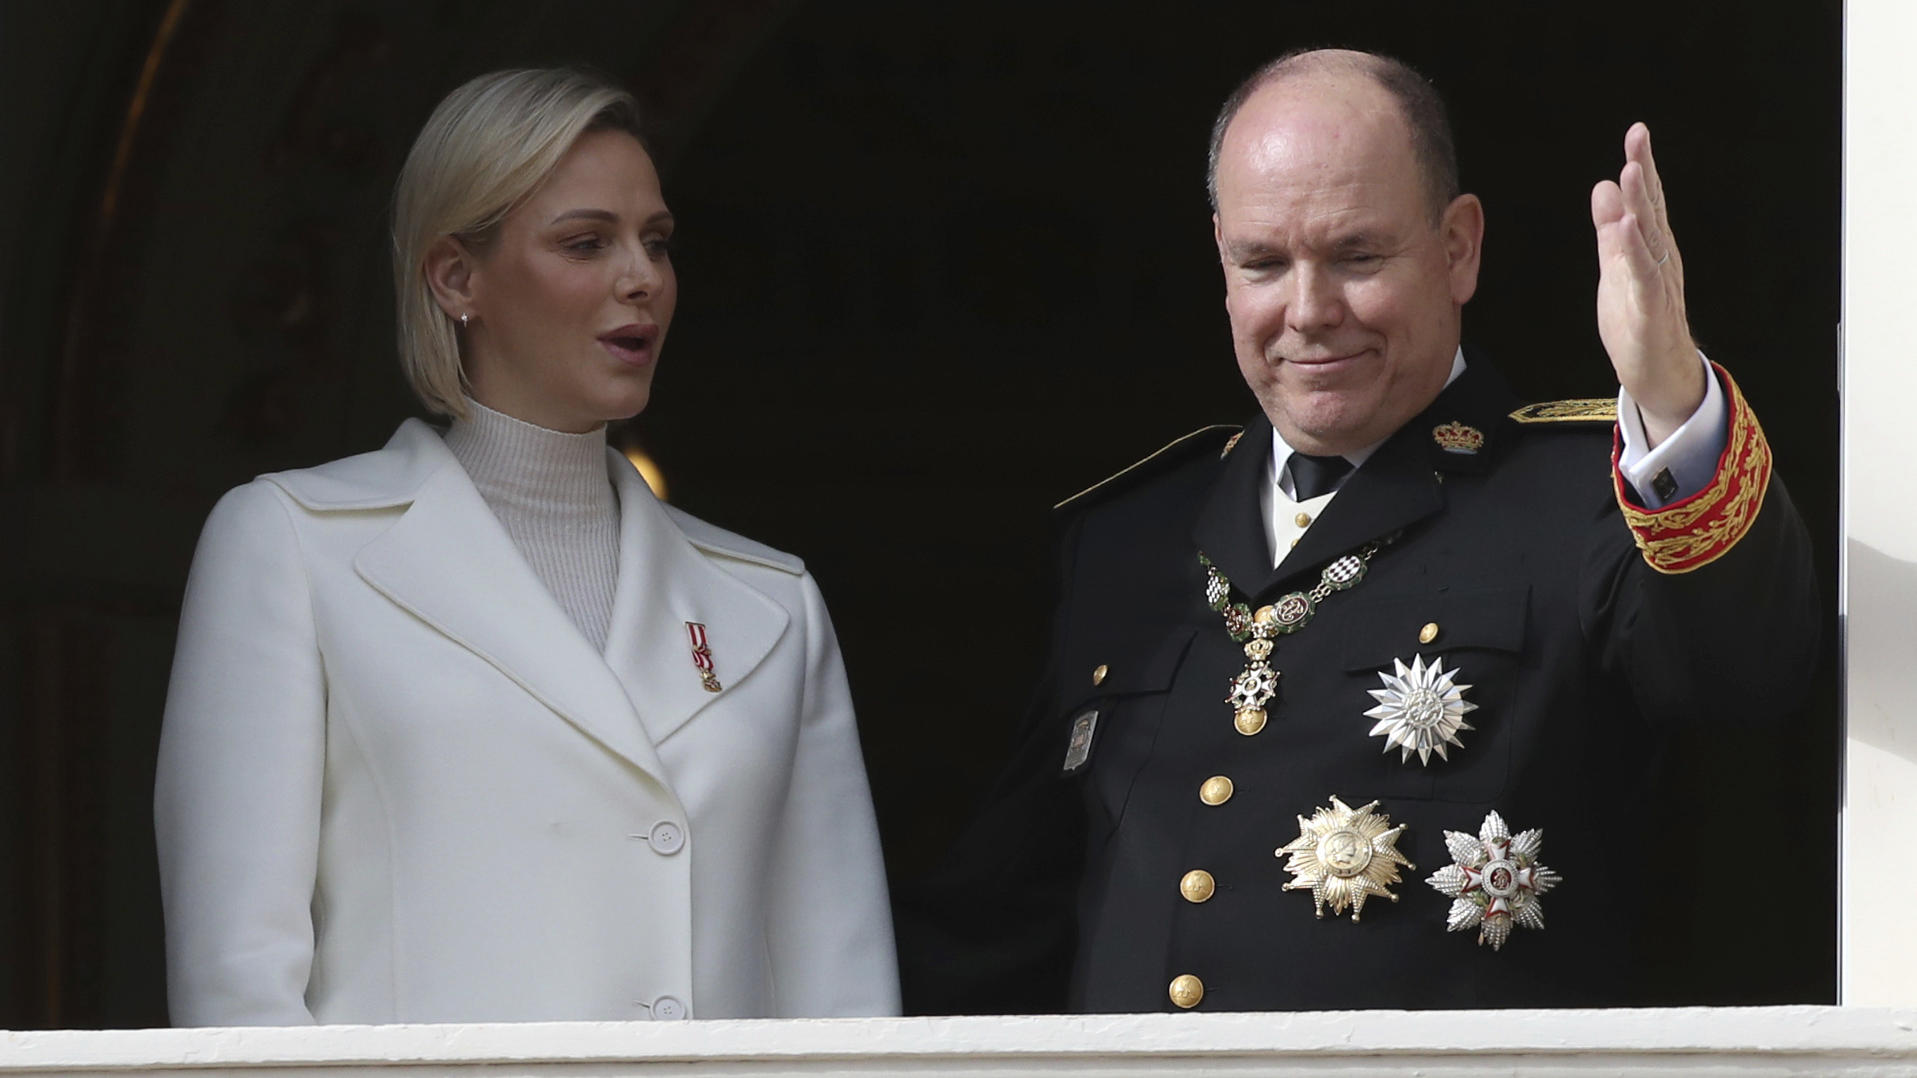 FILE - In this Nov.19, 2019 file photo Prince Albert II of Monaco with his wife Princess Charlene wave from the balcony during the ceremony marking the National Day in Monaco. The palace of Monaco says Prince Albert II has tested positive for the new